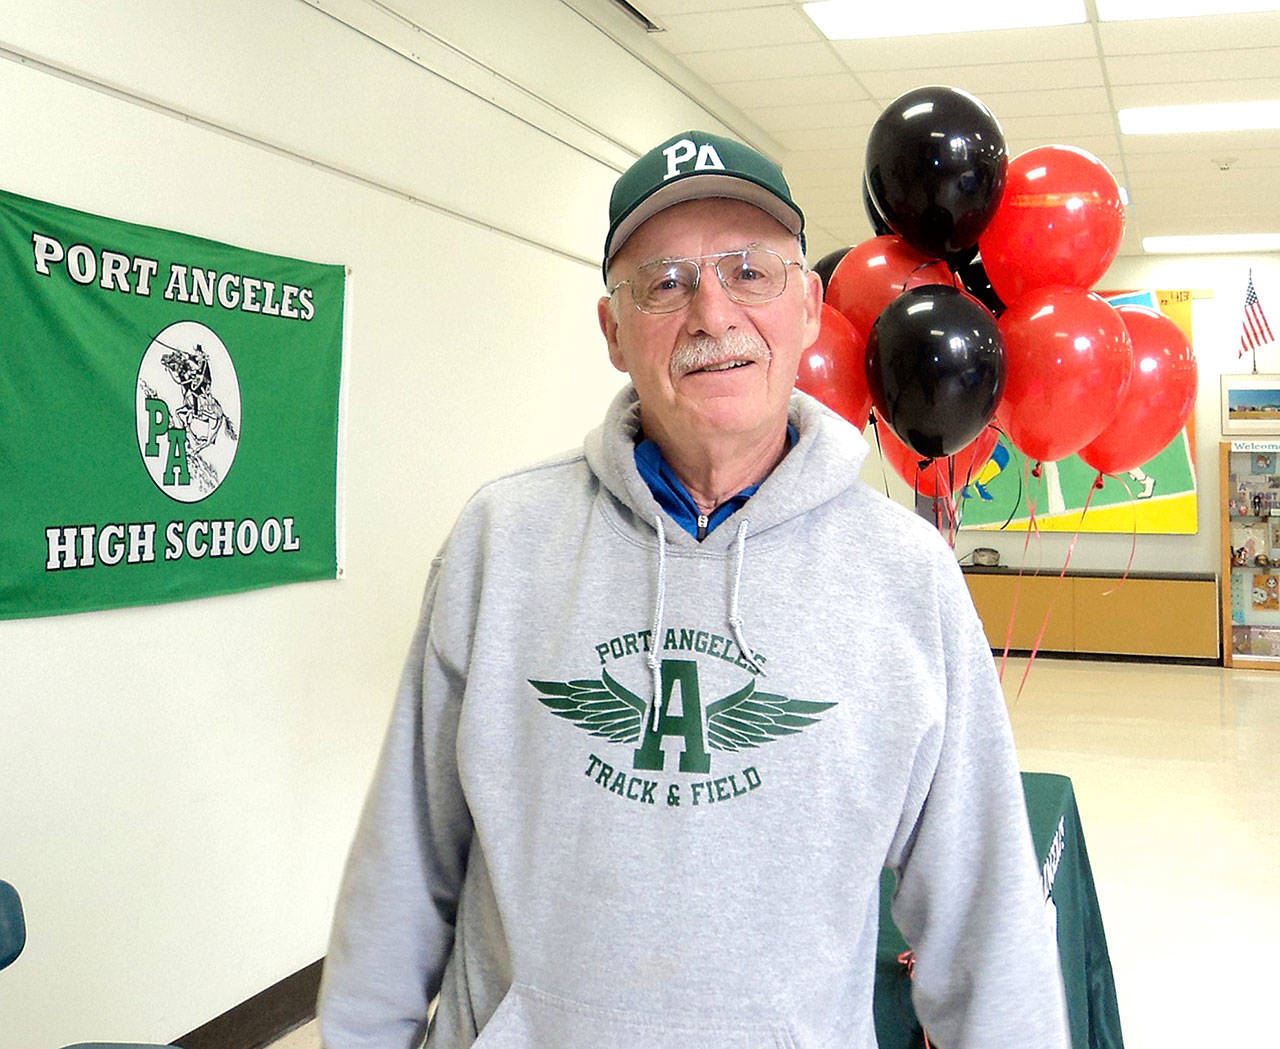 Longtime Port Angeles track and field coach Bob Sheedy is being inducted into the Washington State Track and Field Coaches Hall of Fame along with the Port Angeles Roughrider Hall of Fame next year. (Pierre LaBossiere/Peninsula Daily News)